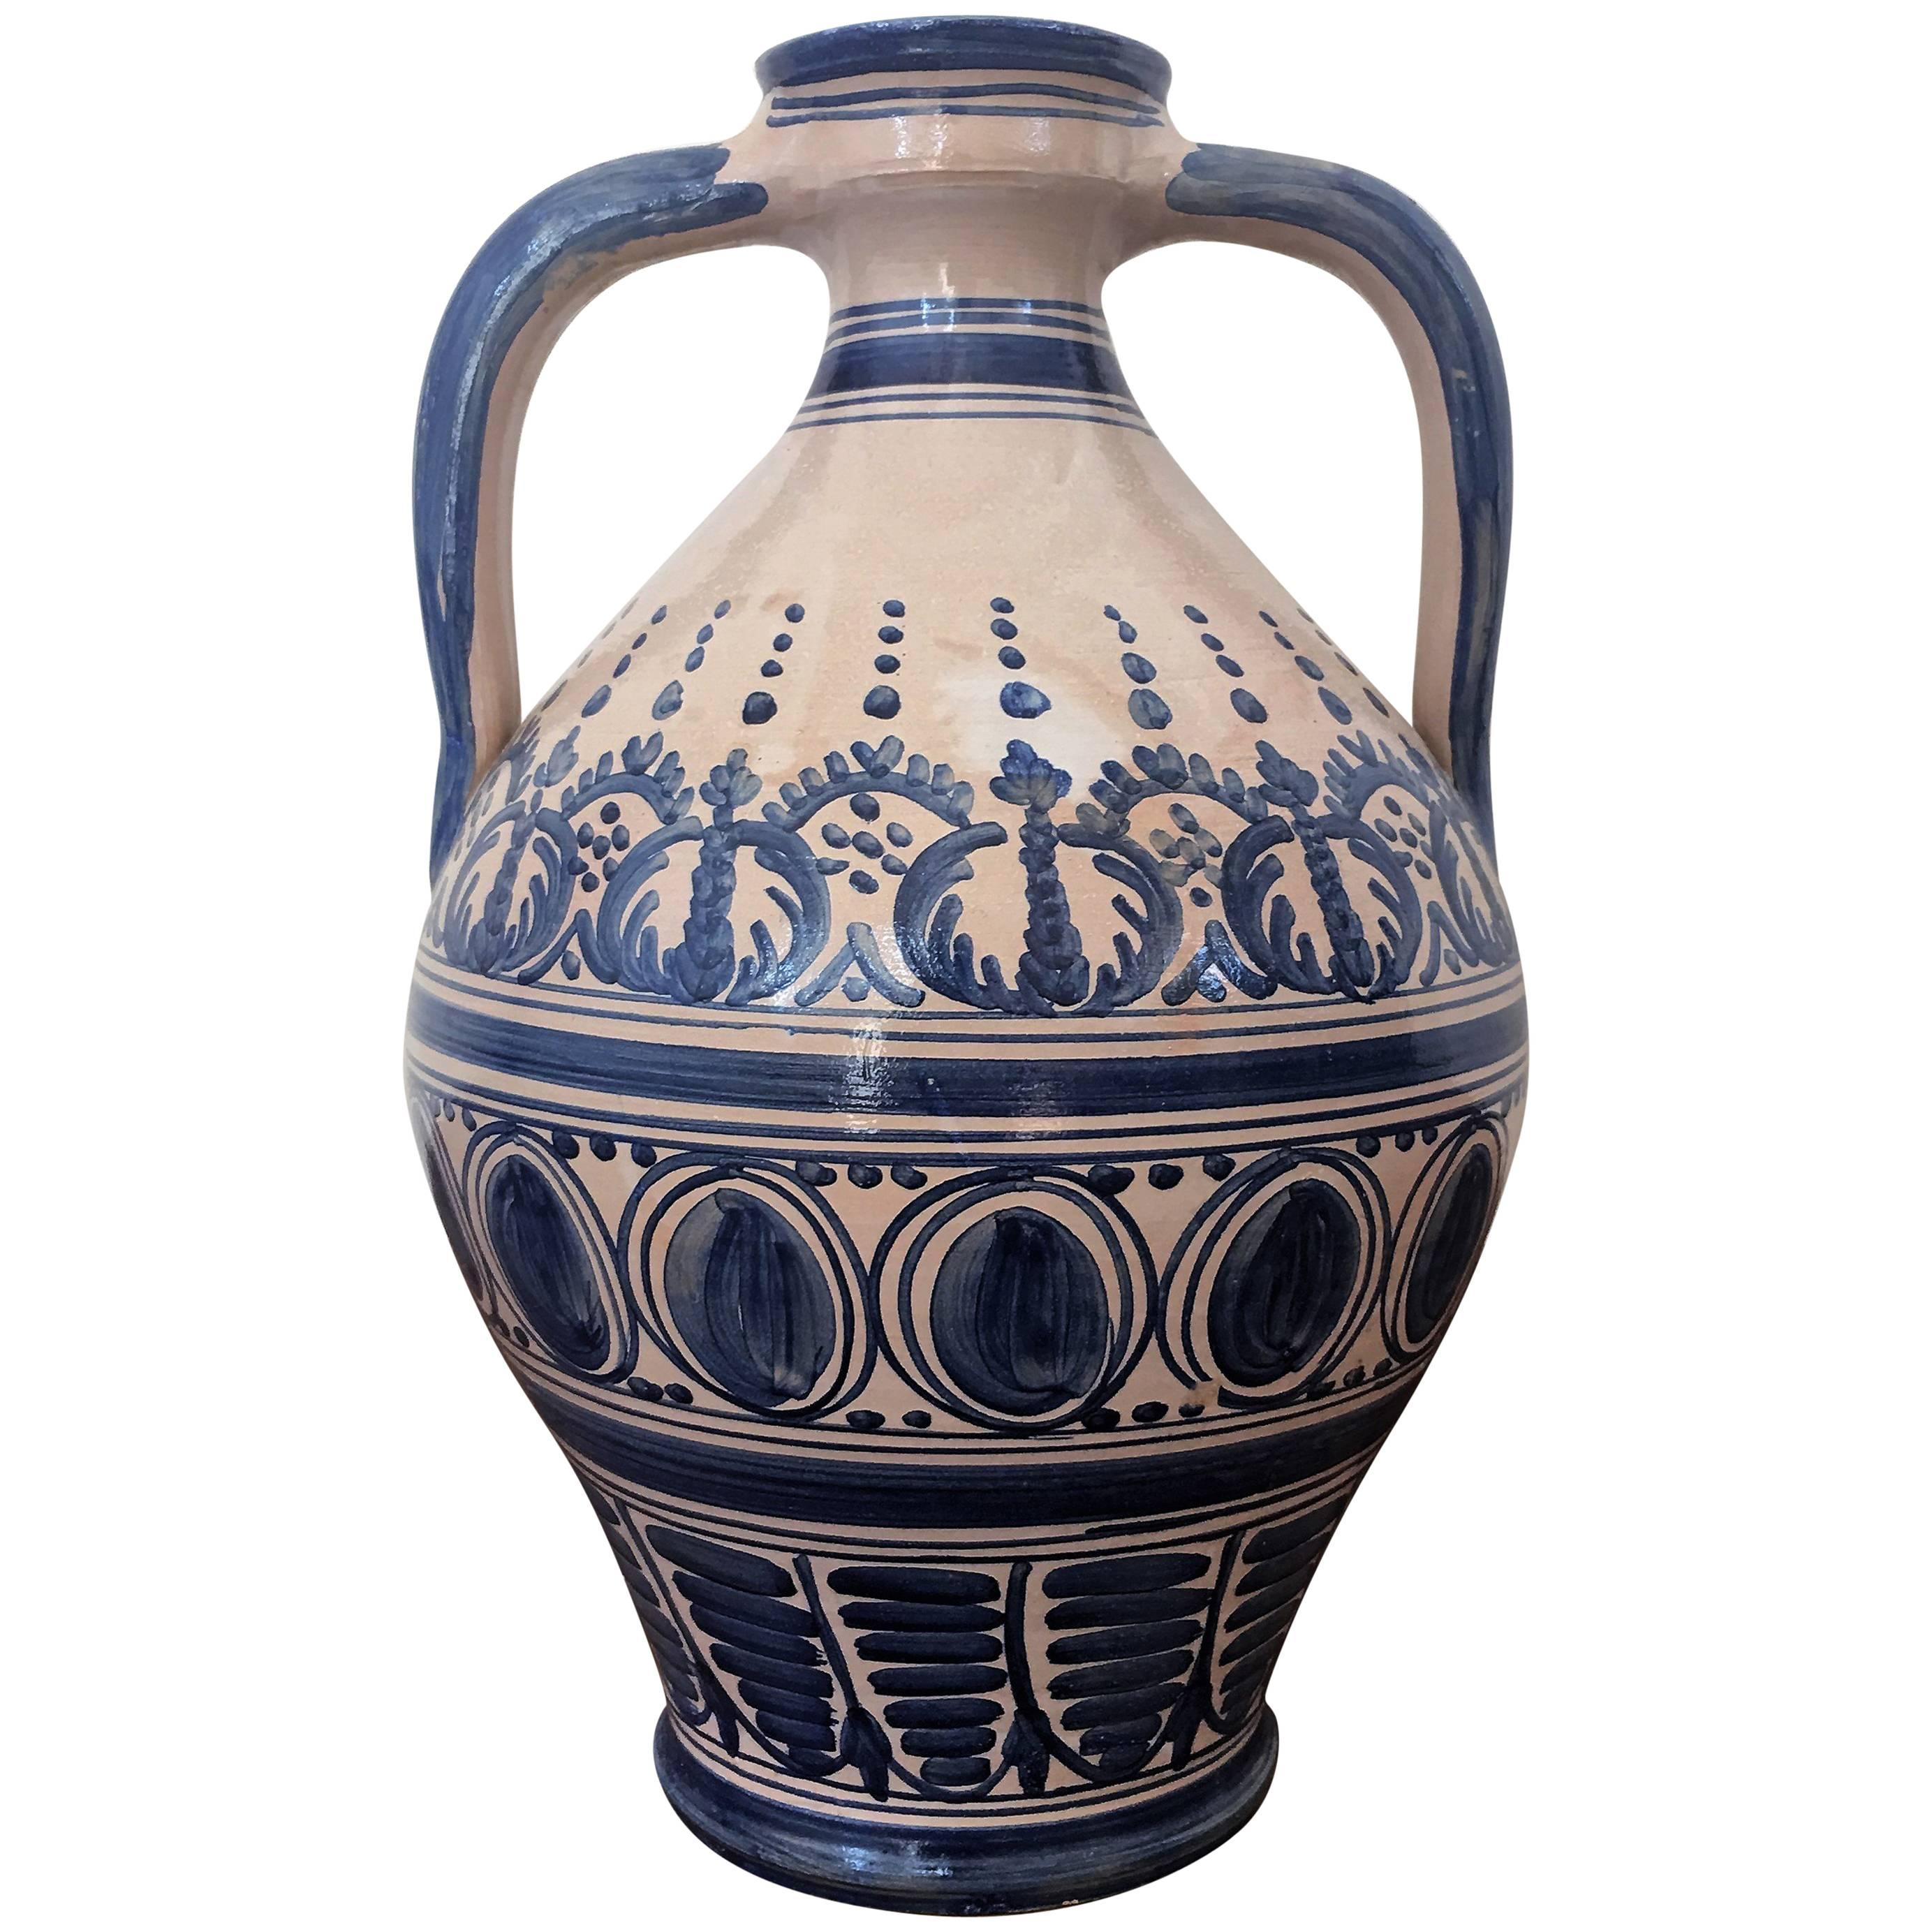 Striking Continental Glazed Earthenware Blue and White Painted Urn